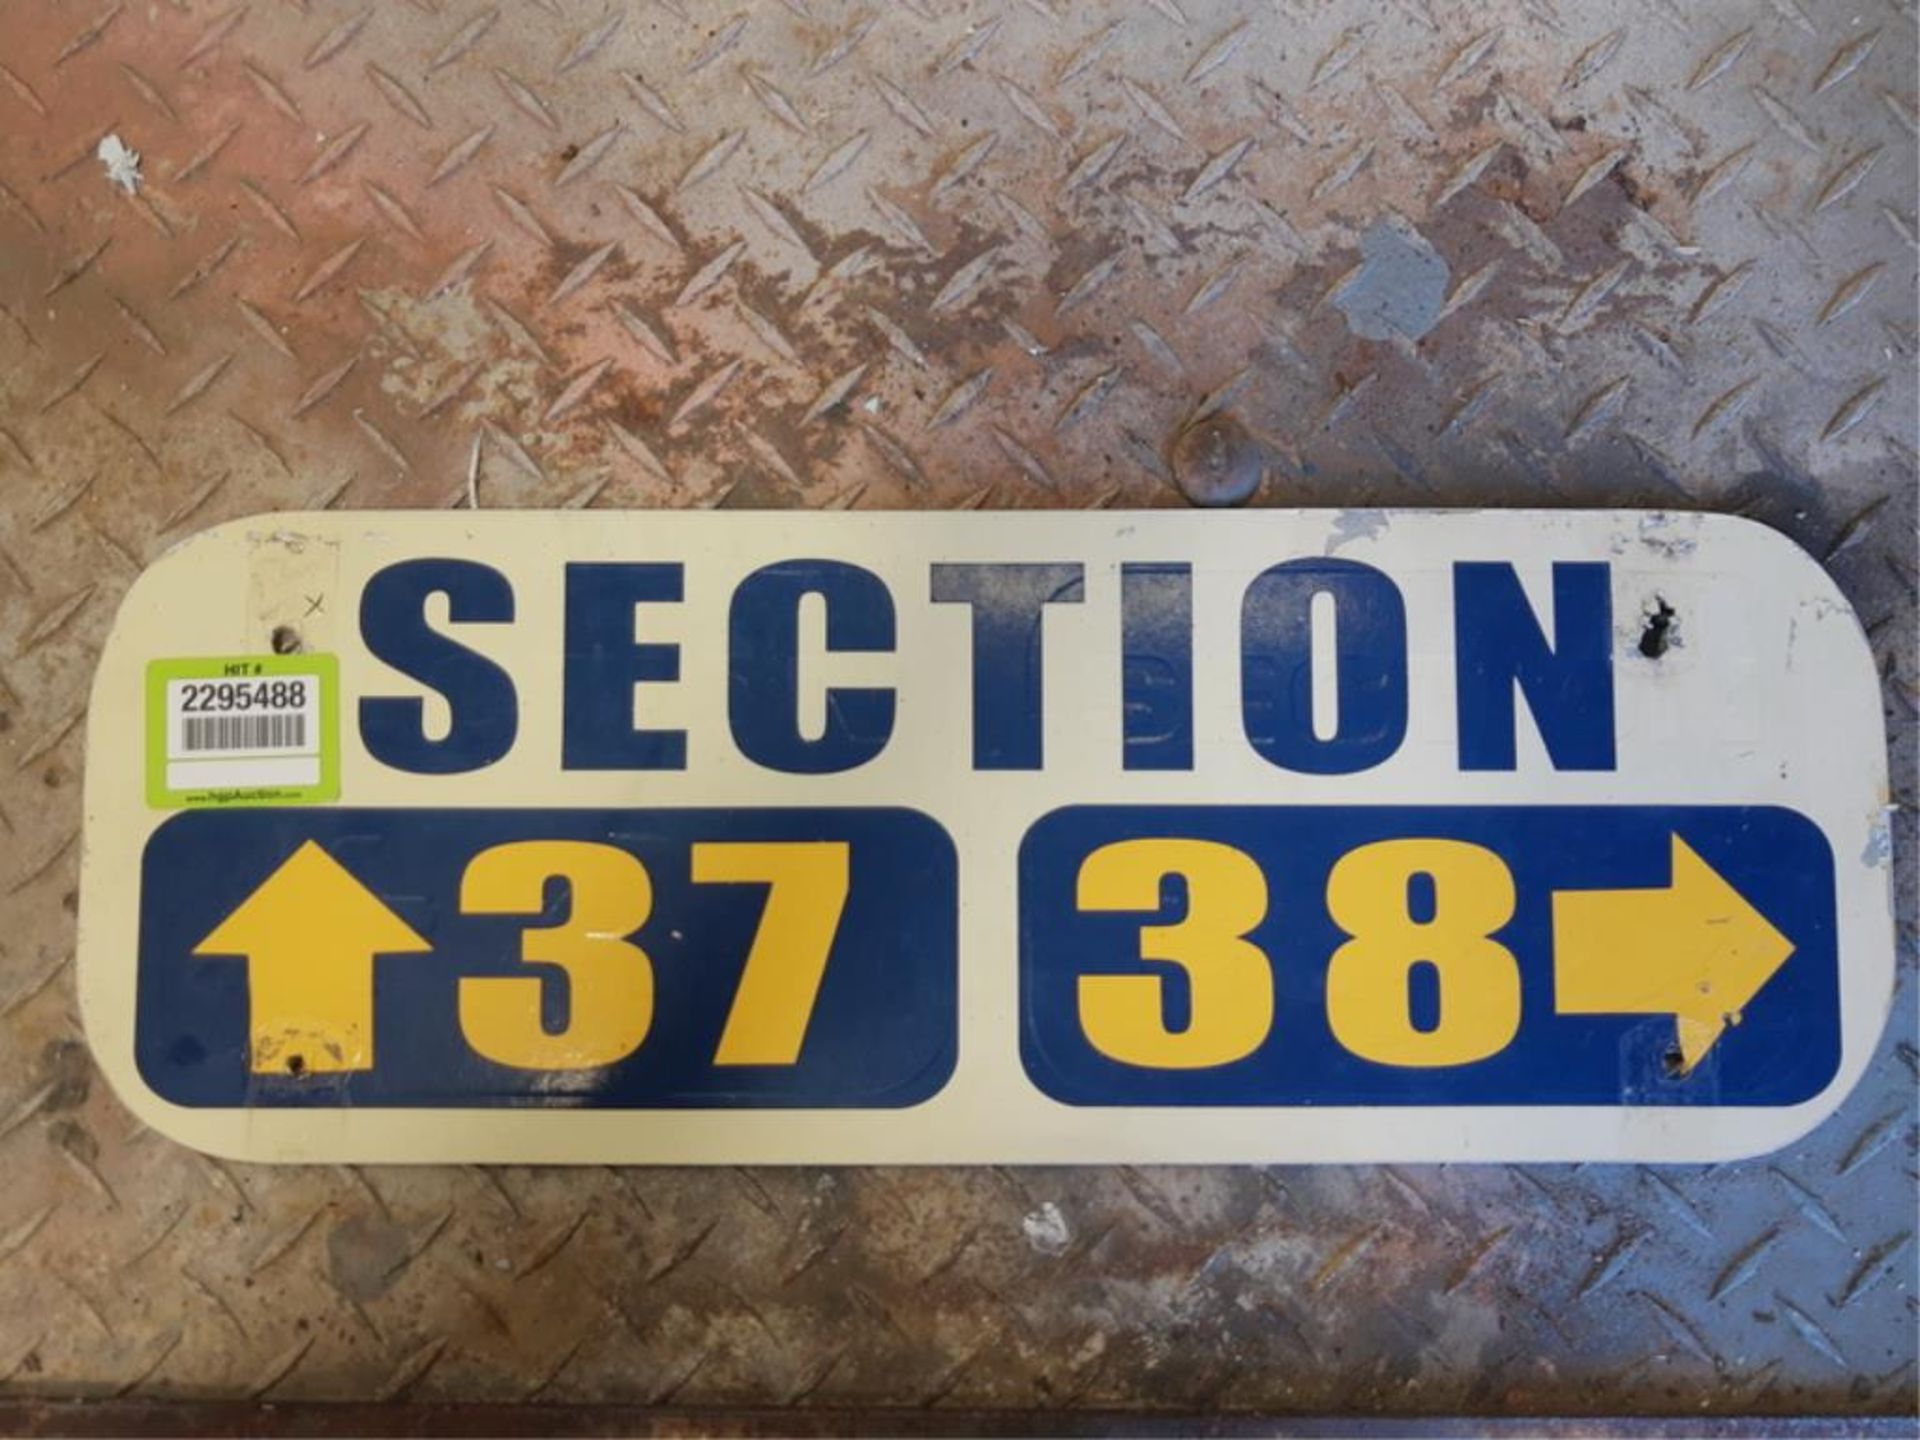 Direction Section Sign